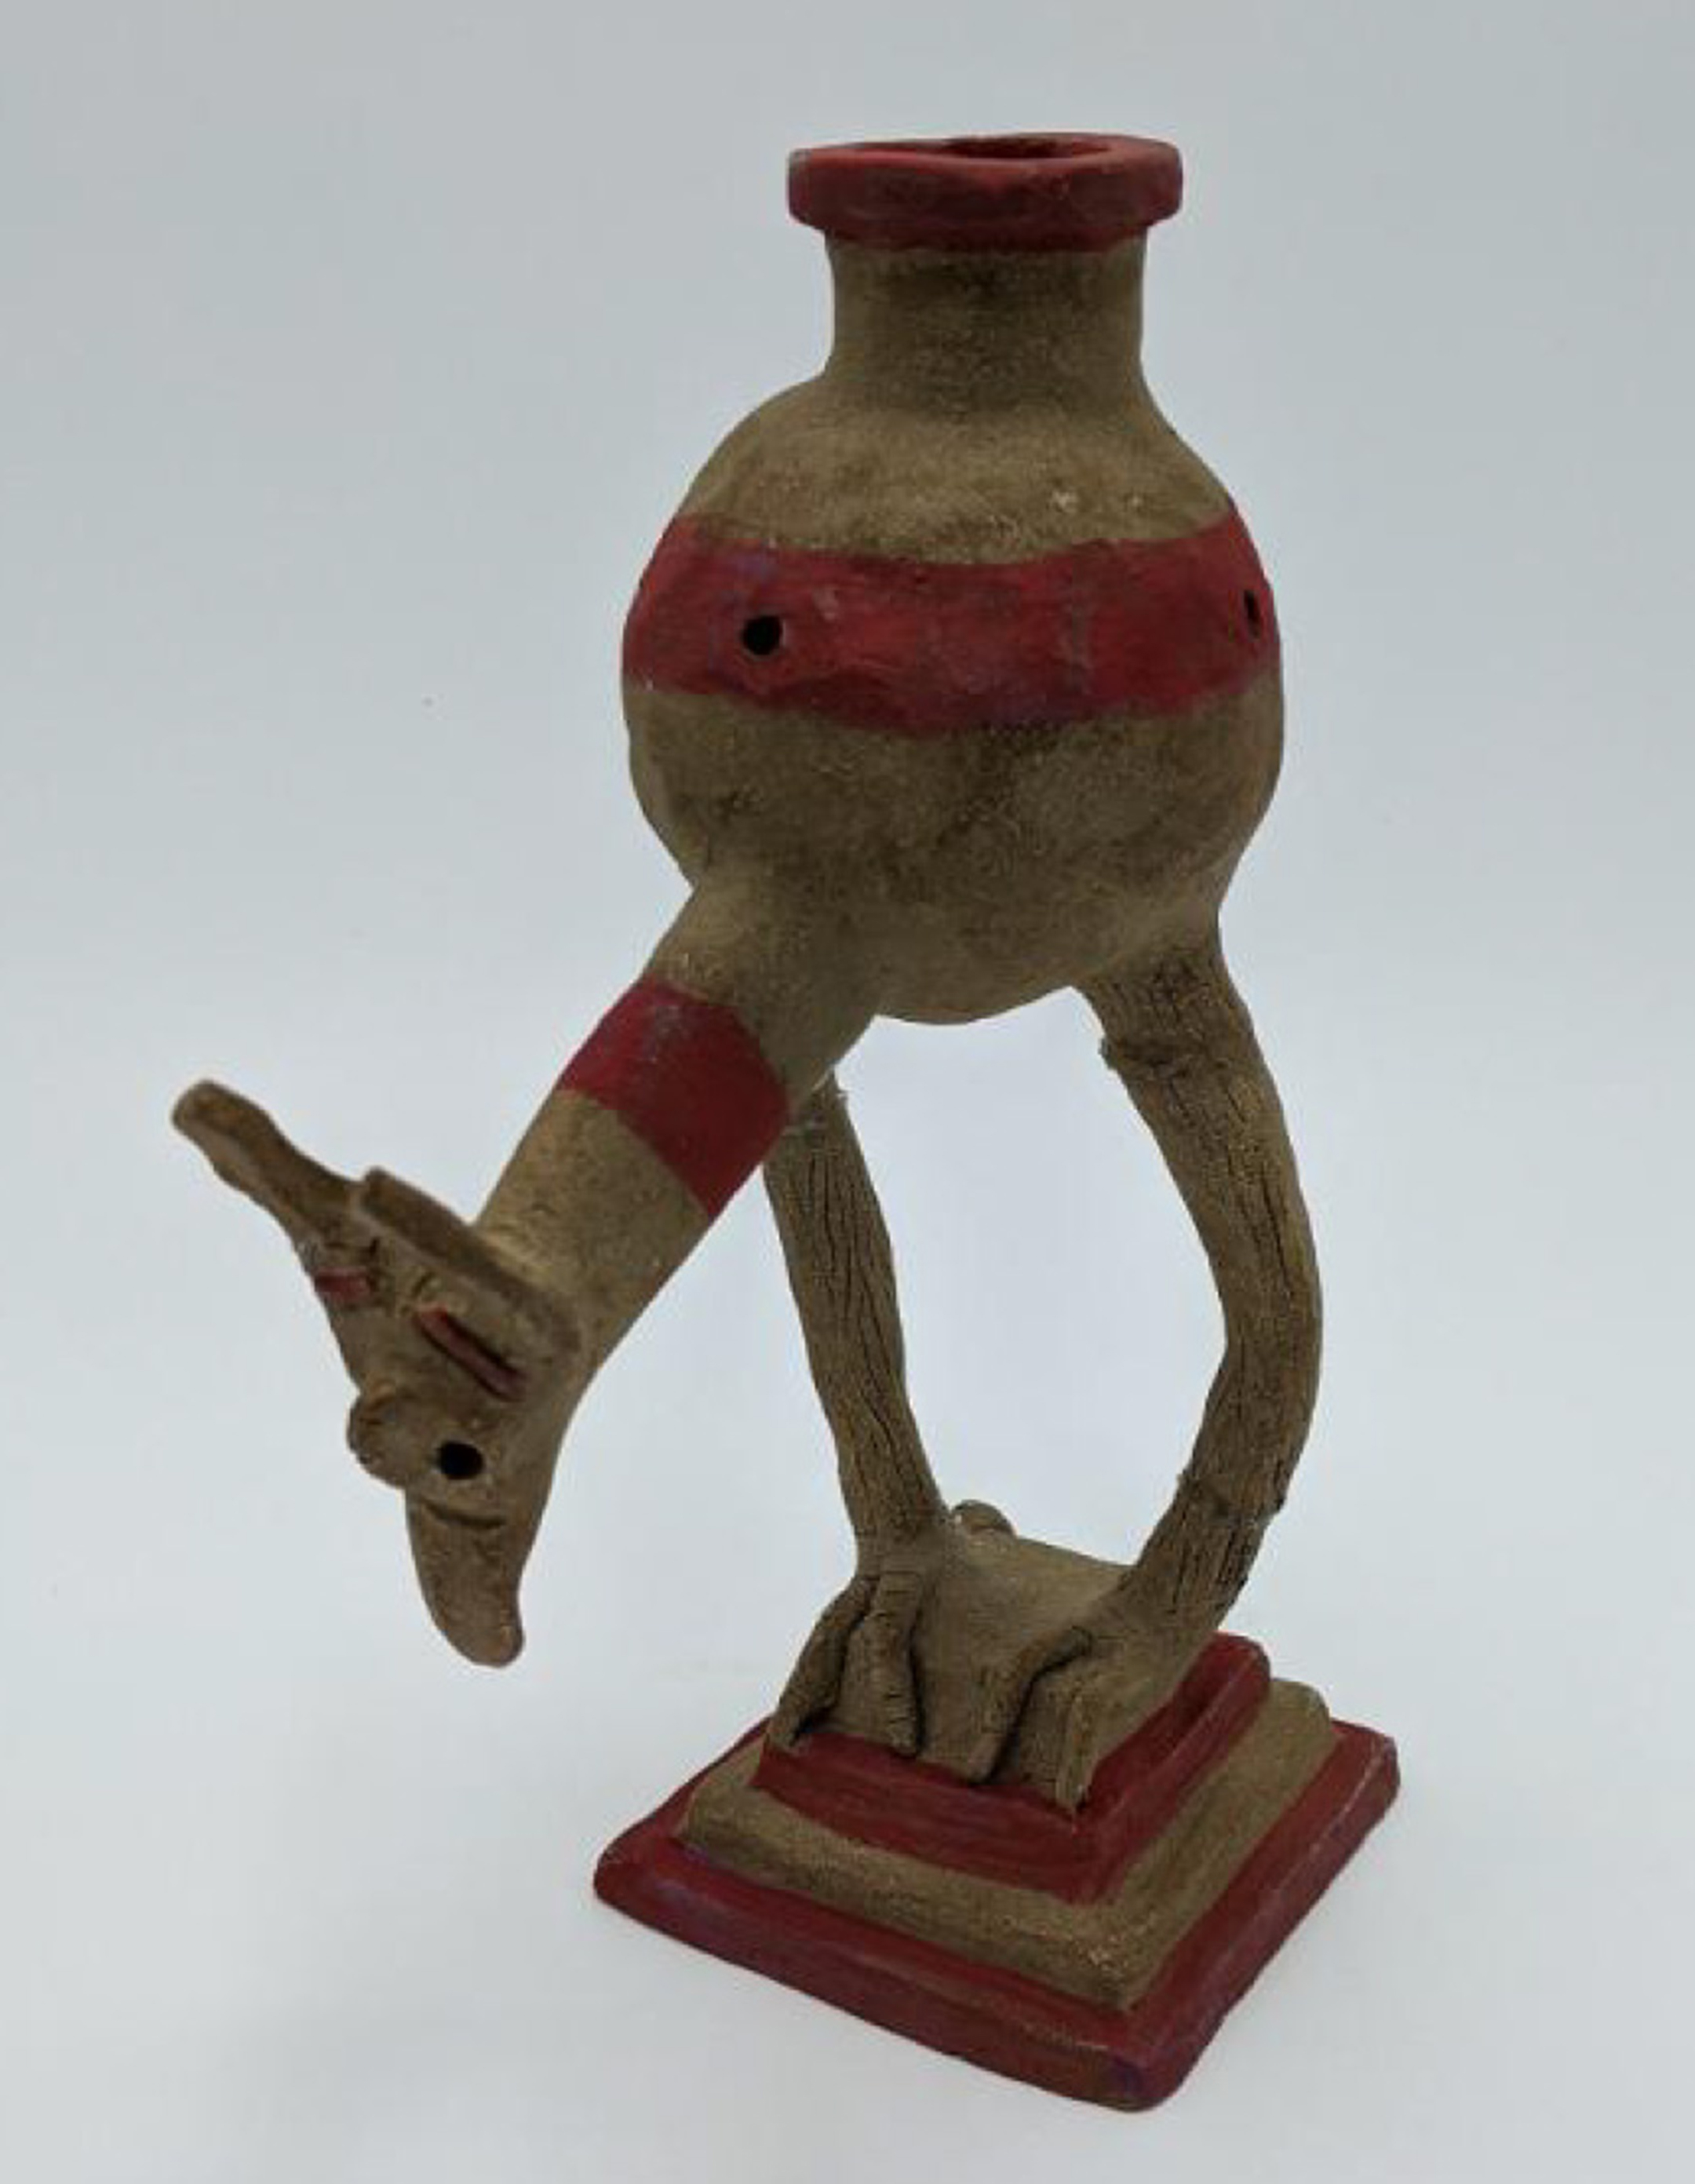 Sculpture of a yellowish creature with a long neck and red stripes in a bowl shape on long legs